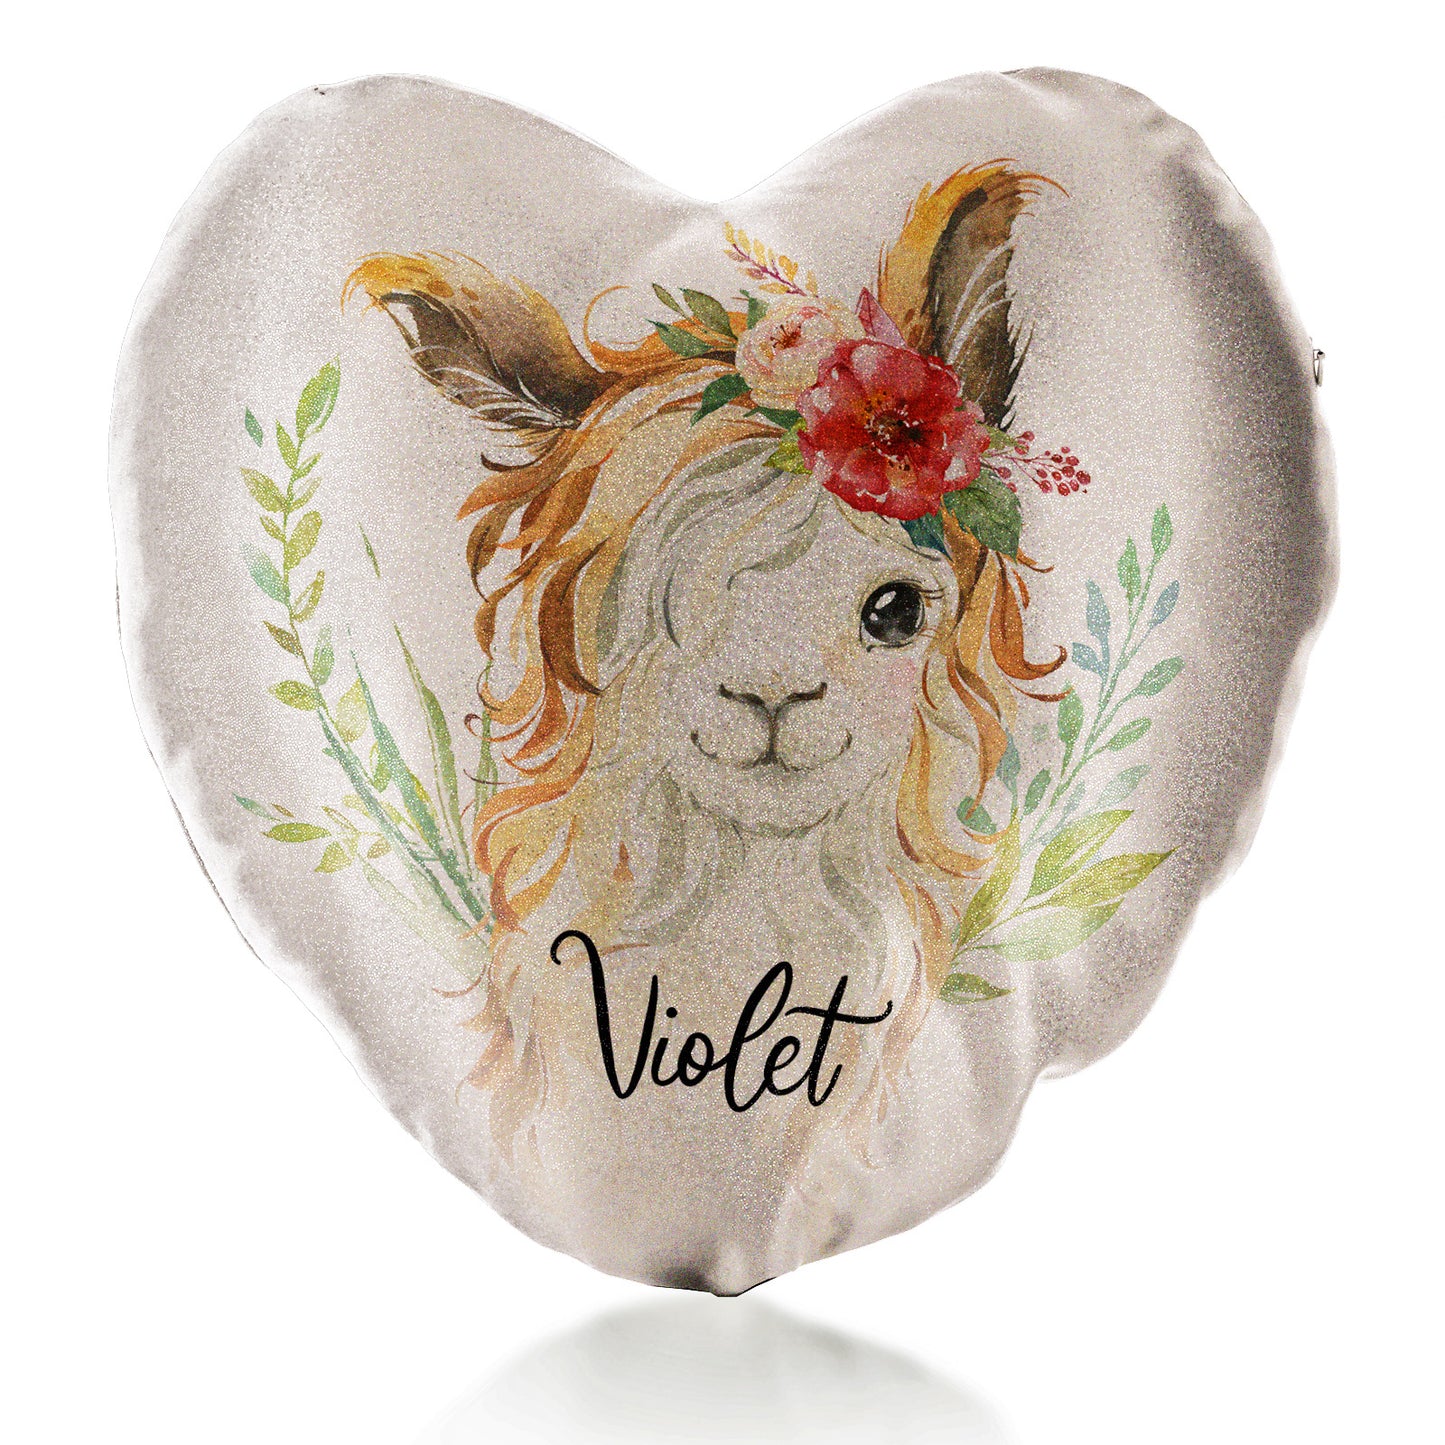 Personalised Glitter Heart Cushion with White Goat with Red Flower Hair and Cute Text